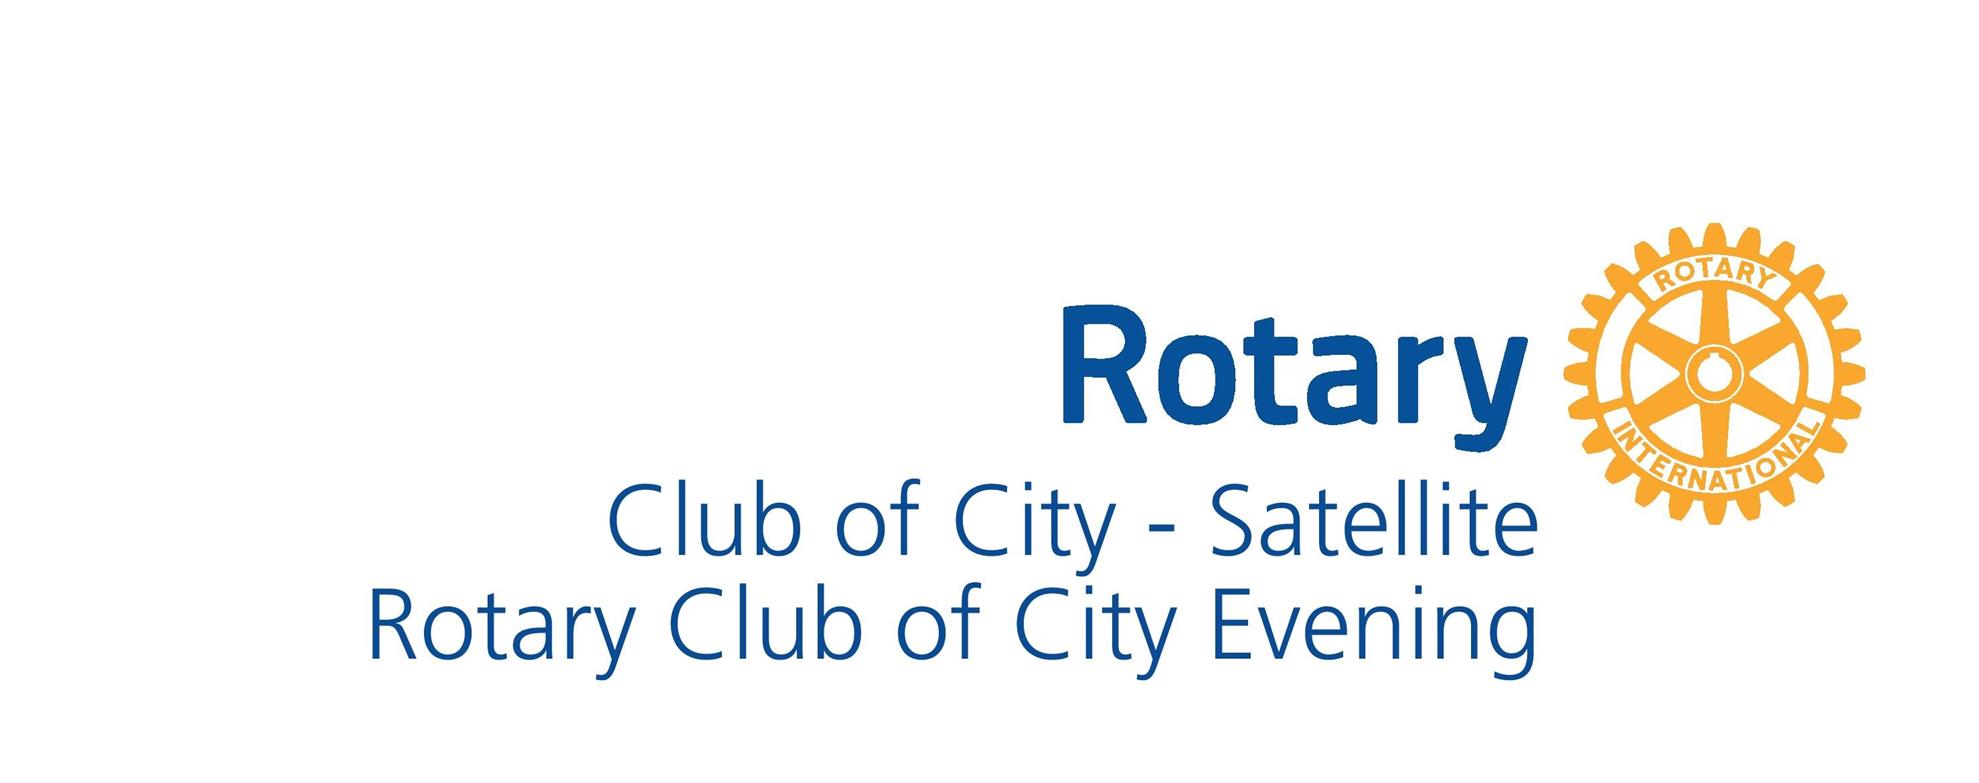 Consider Satellite Rotary Clubs as an option for membership growth ...